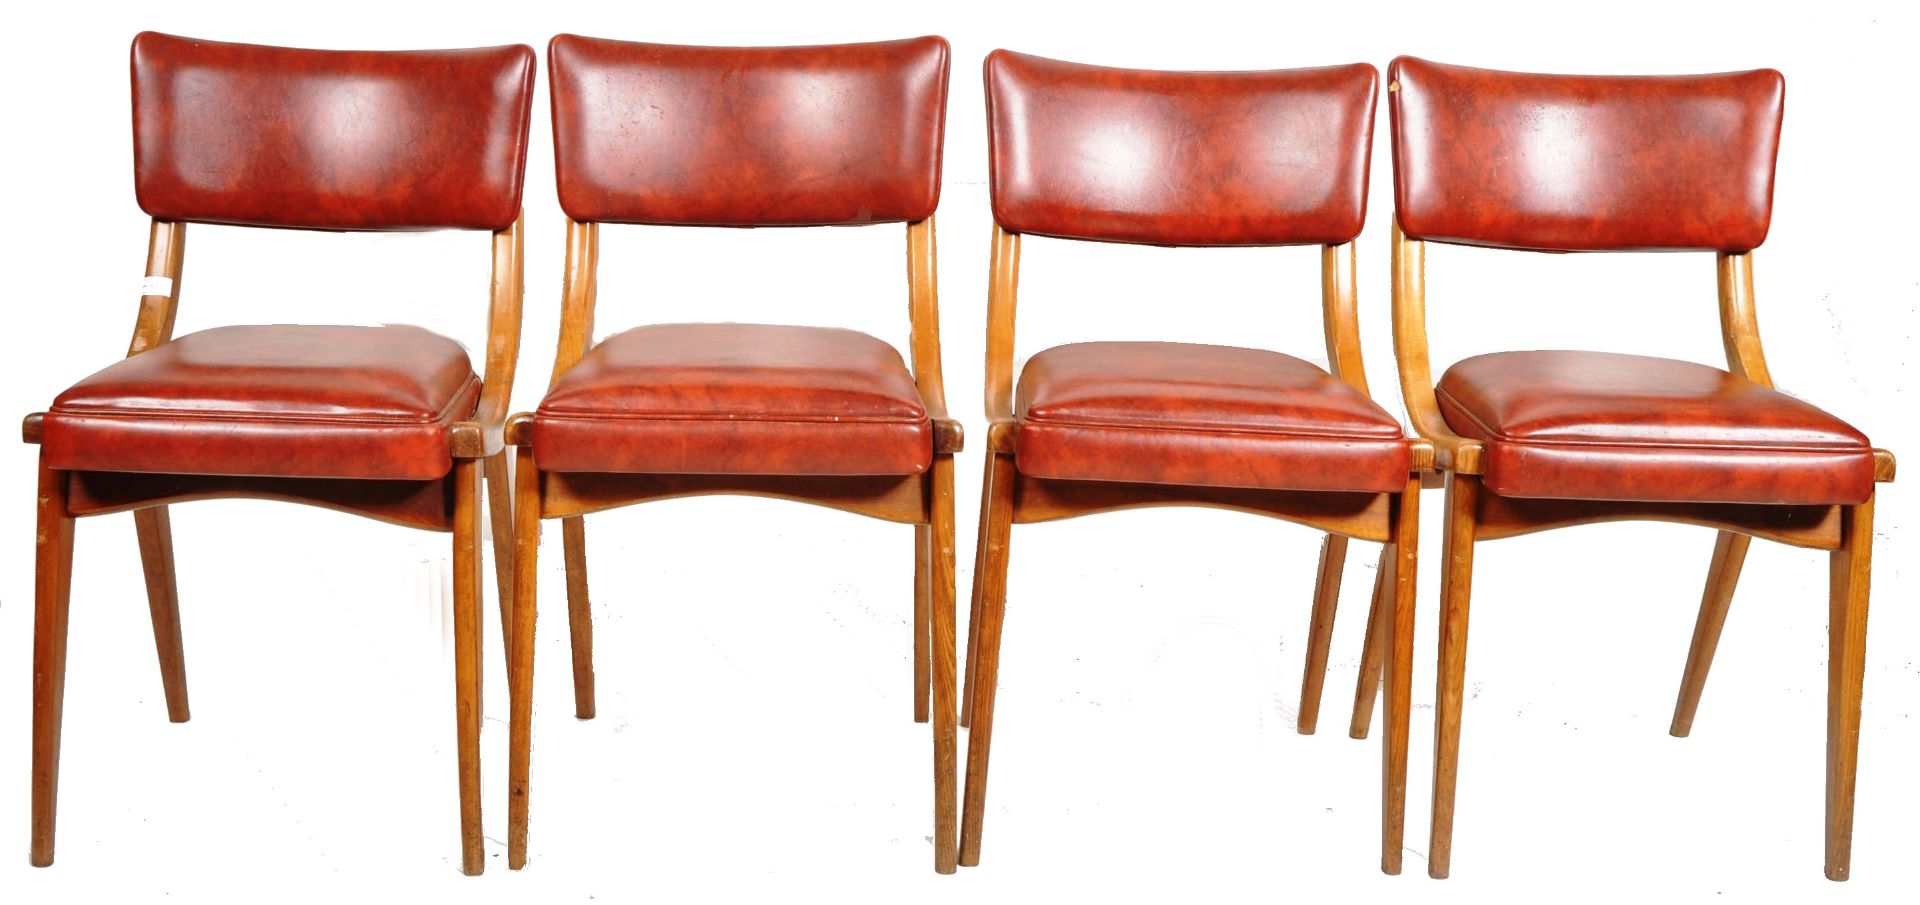 BEN CHAIRS - SET OF FOUR 1960'S BENTWOOD DINING CHAIRS